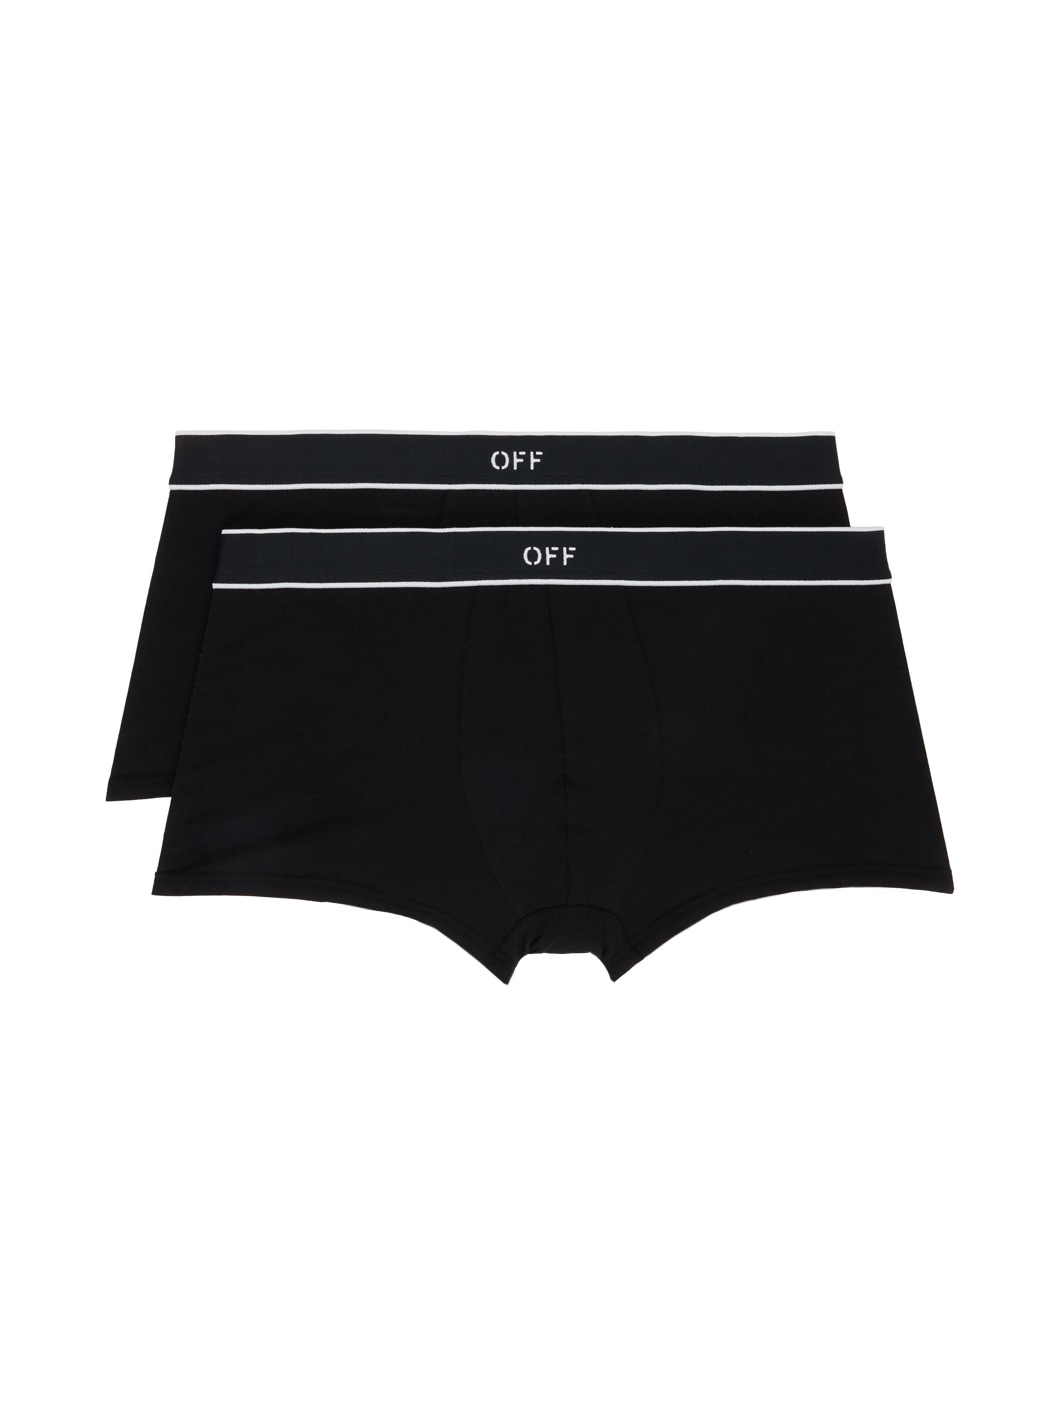 Two-Pack Black Off-Stamp Boxers - 1